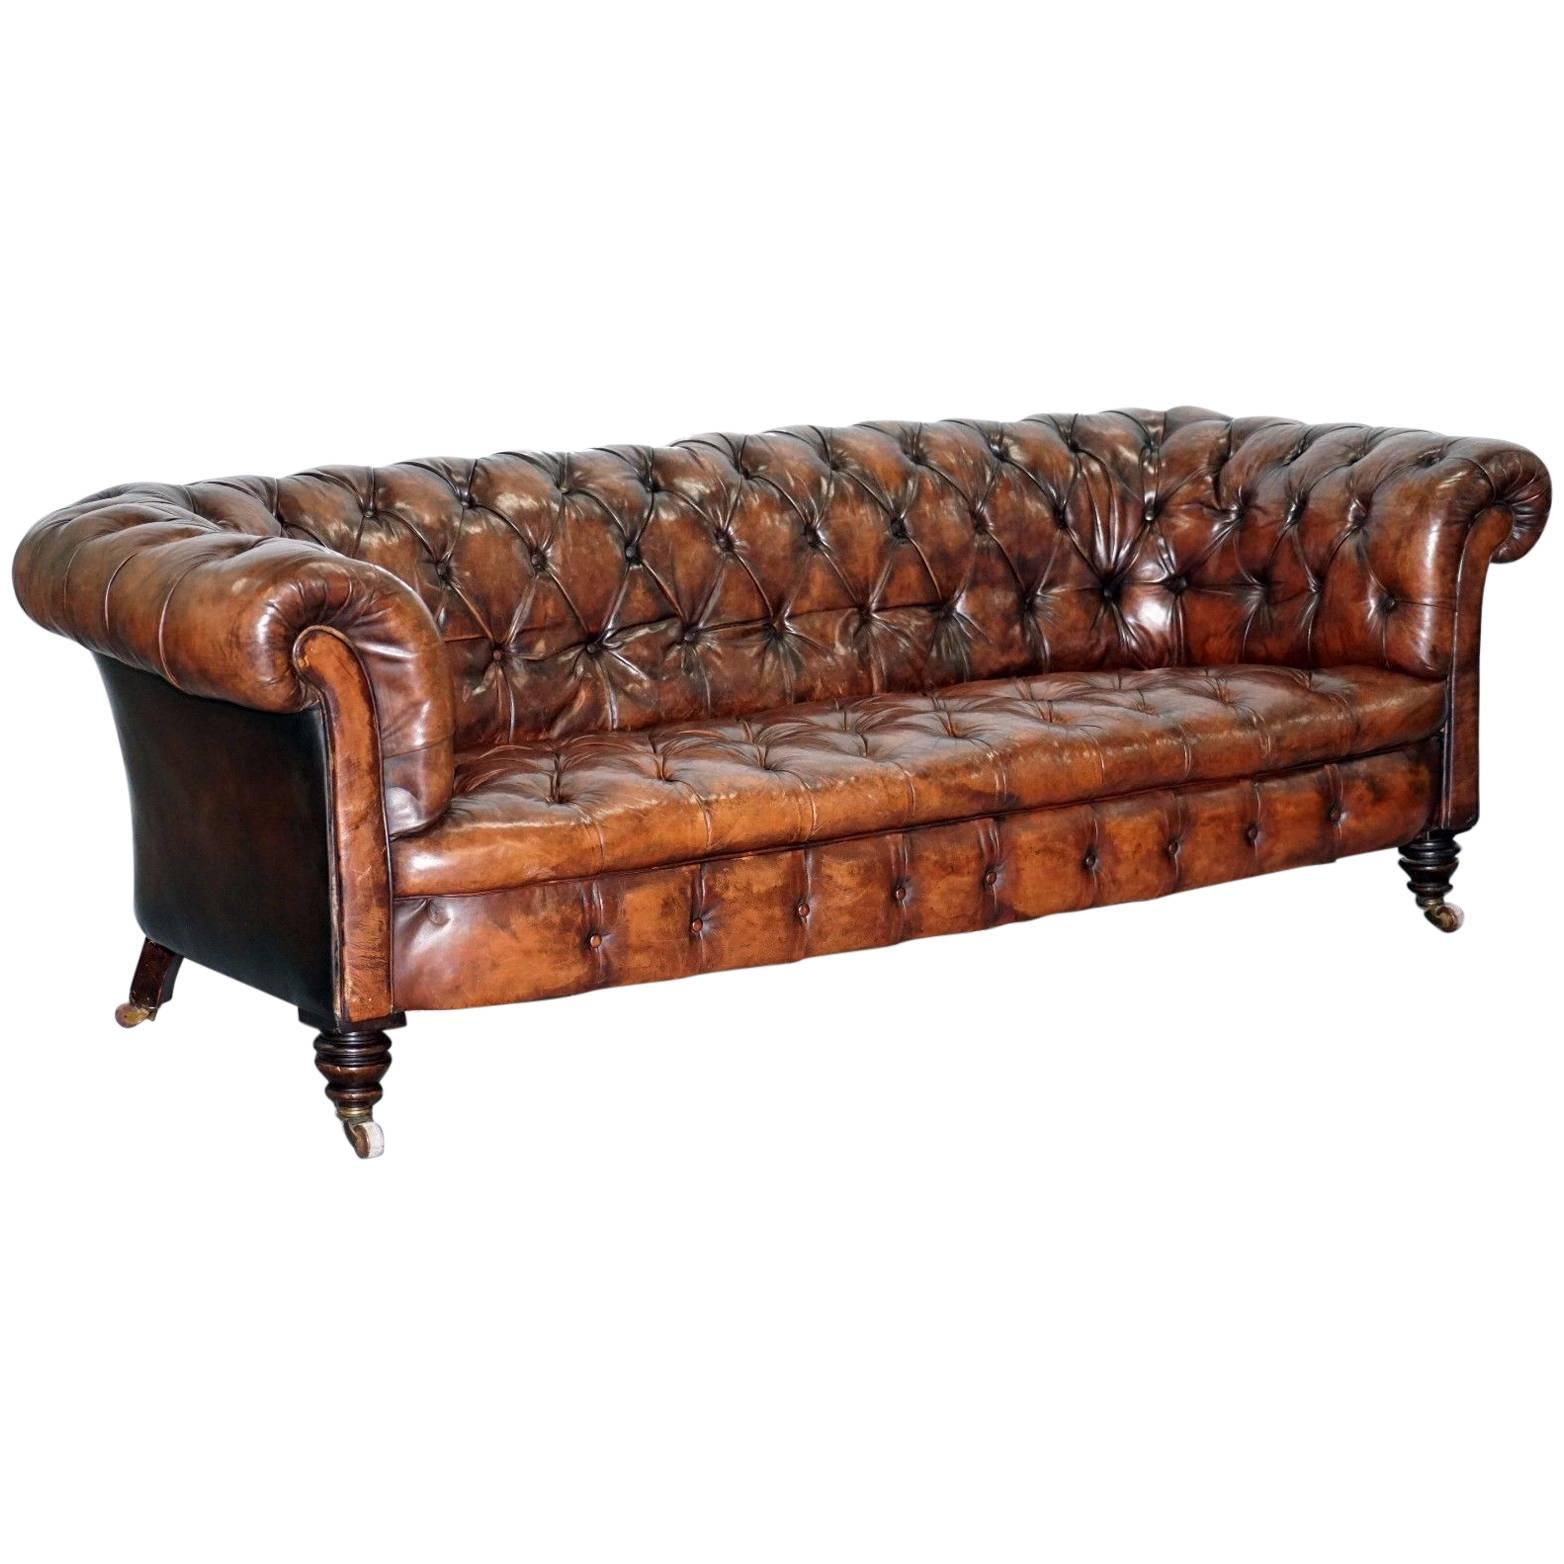 Victorian James Jas Shoolbred Chesterfield Sofa Fully Stamped, circa 1860